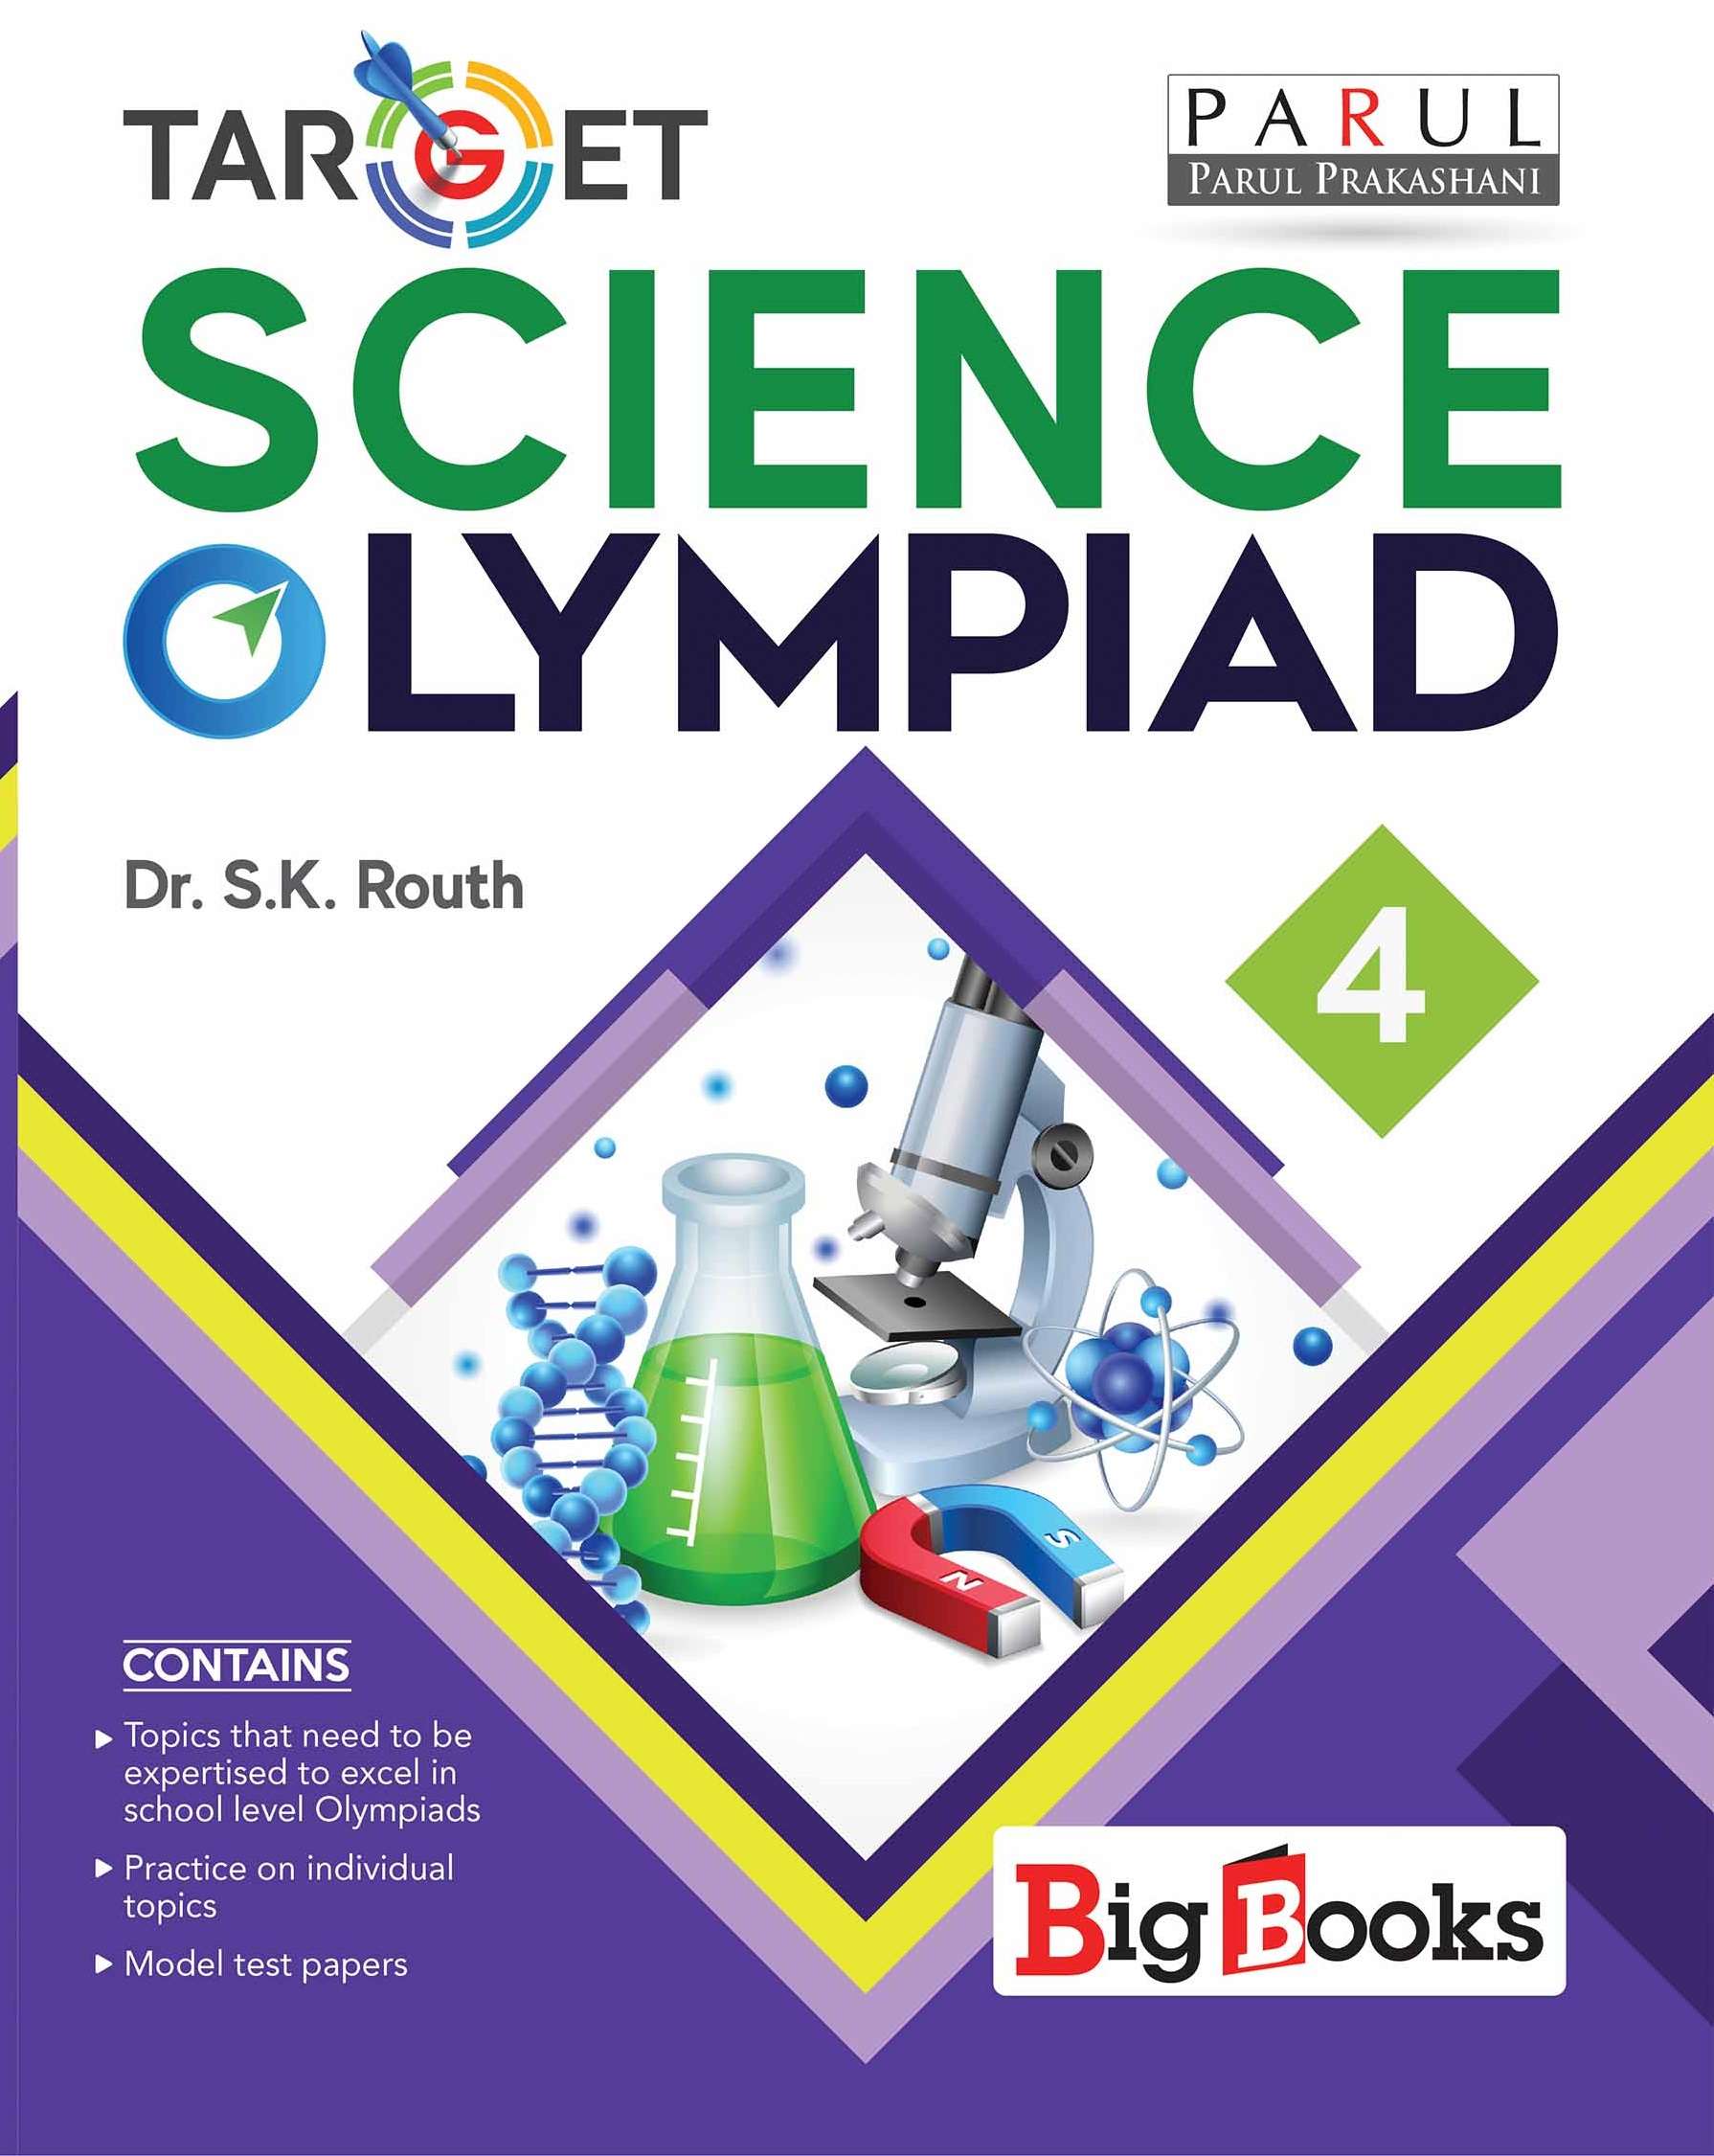 Buy Science Olympiad book for 4